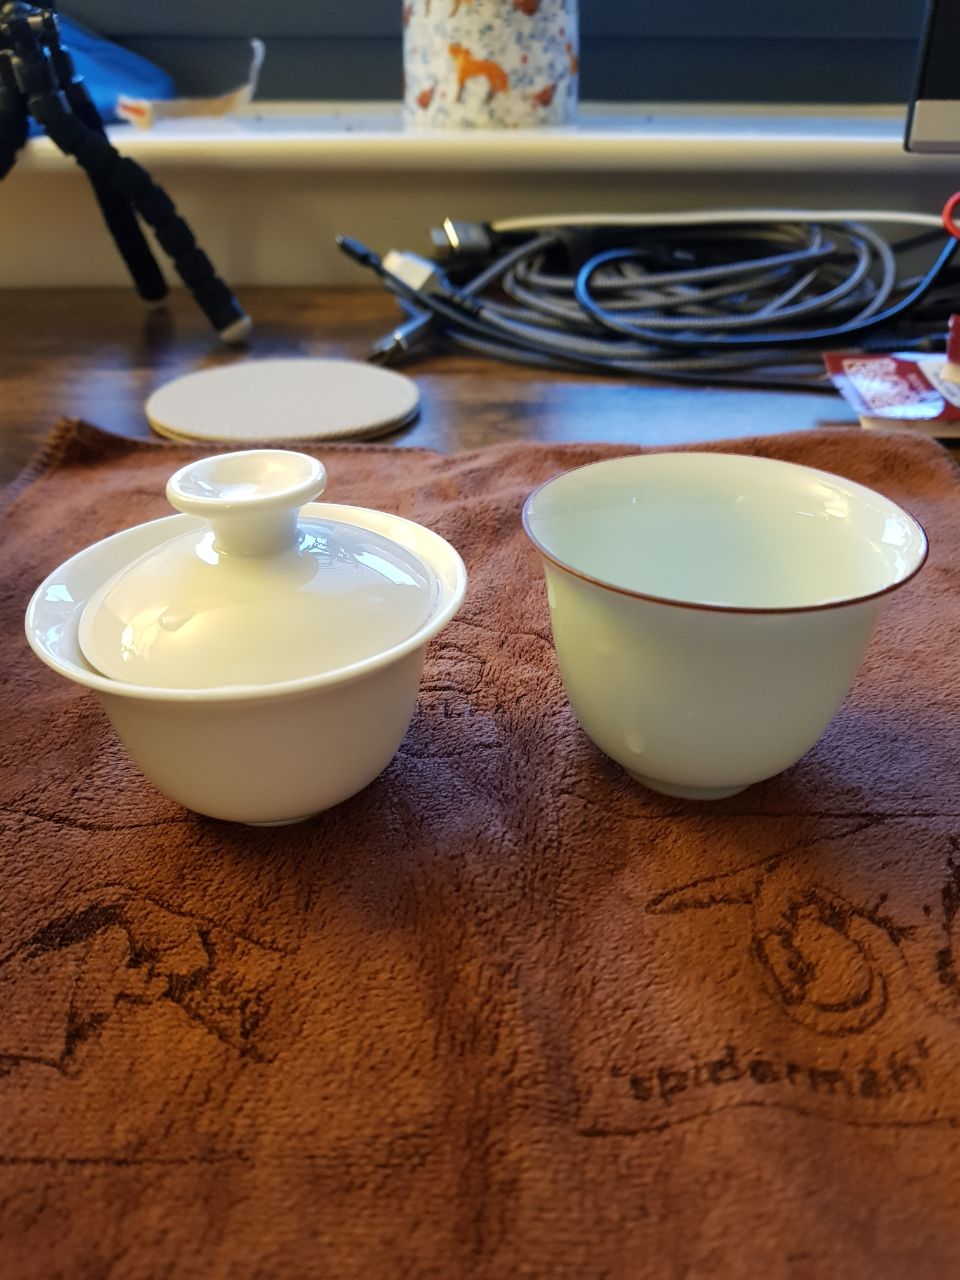 gaiwan, cup, and towel